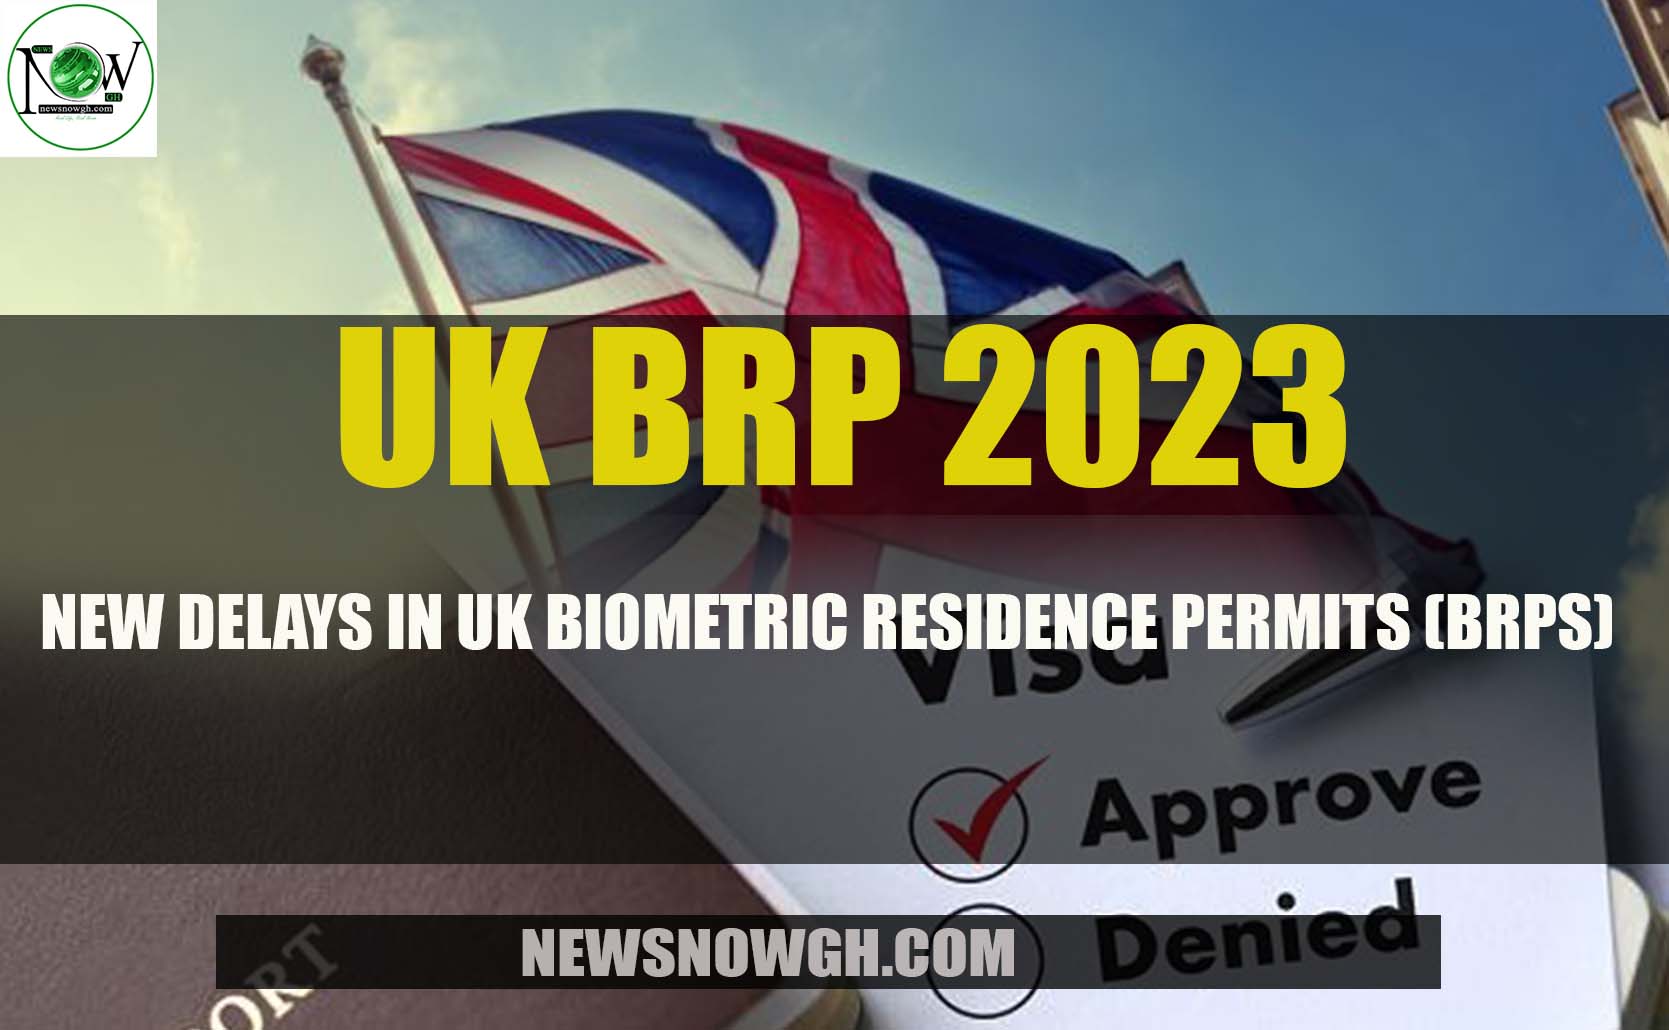 New Delays in UK Biometric Residence Permits (BRPs)